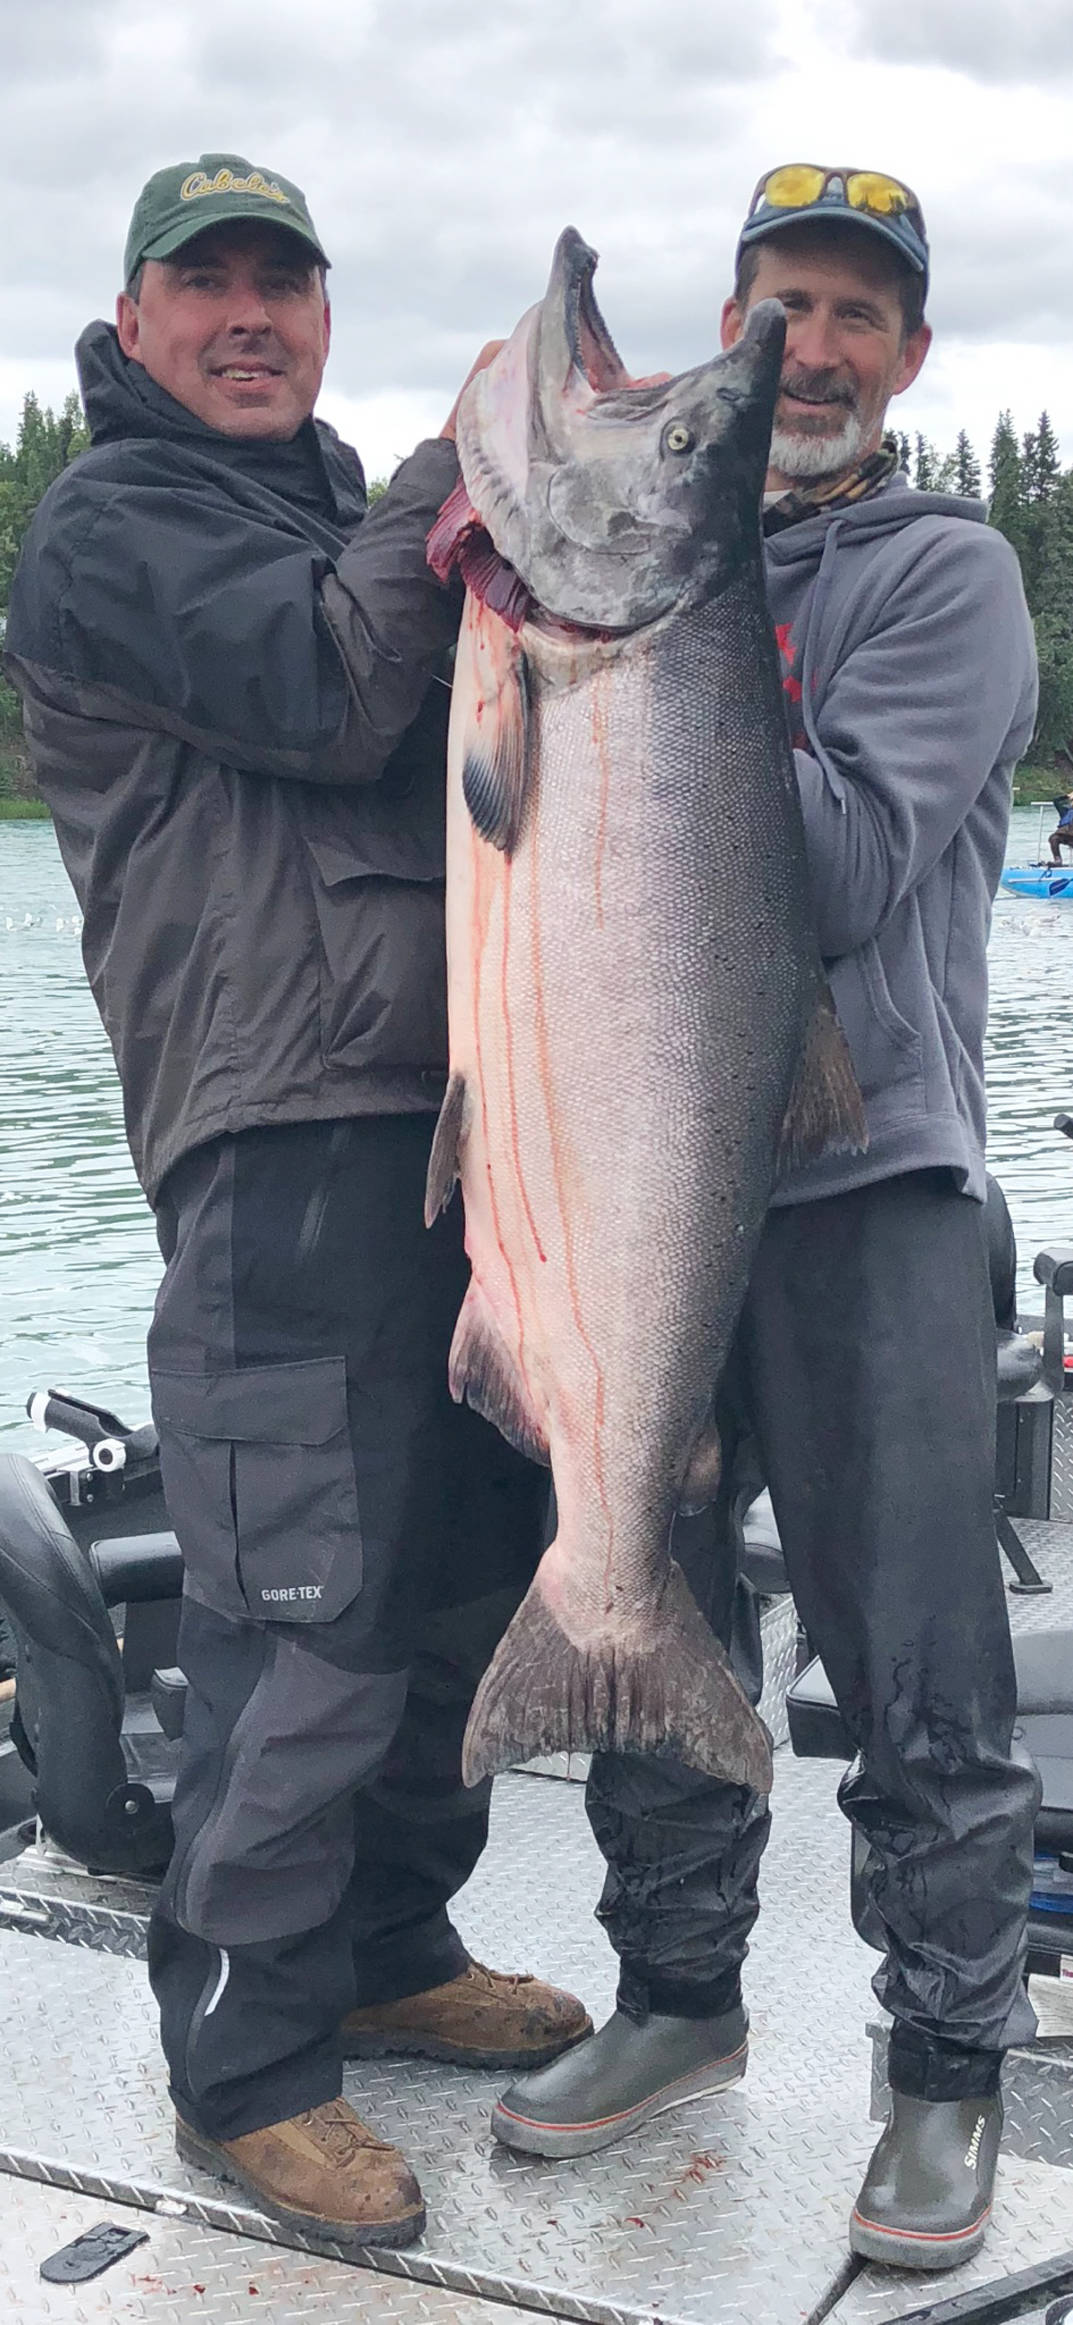 This photo shows an approximately 70-pound king caught on the Kenai River by Troy Grote of Aberdeen, South Dakota, on Saturday, July 14, 2018. The fish measured 51 1/2 inches in length and 31 1/2 inches in girth. (Photo coutesy Joe Johnson)